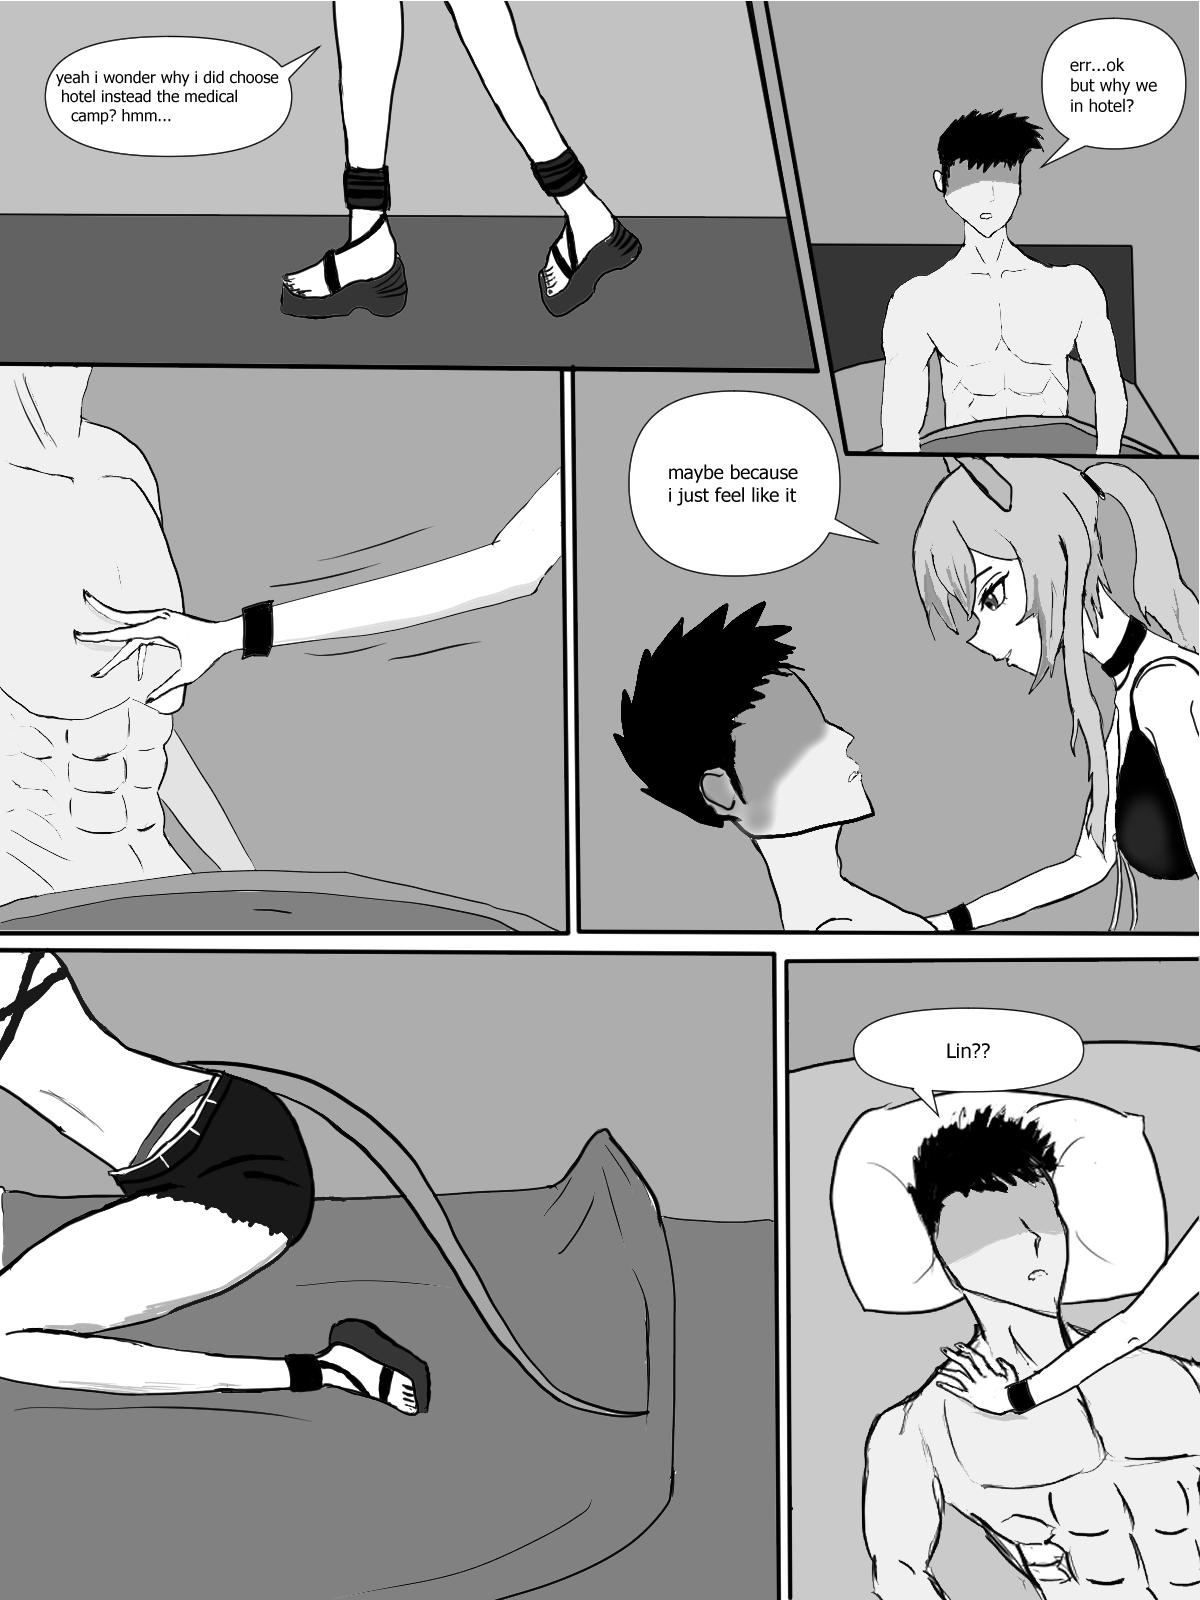 Gay arknight lin and doctor after watermelon game accident - Original Gay Studs - Page 4